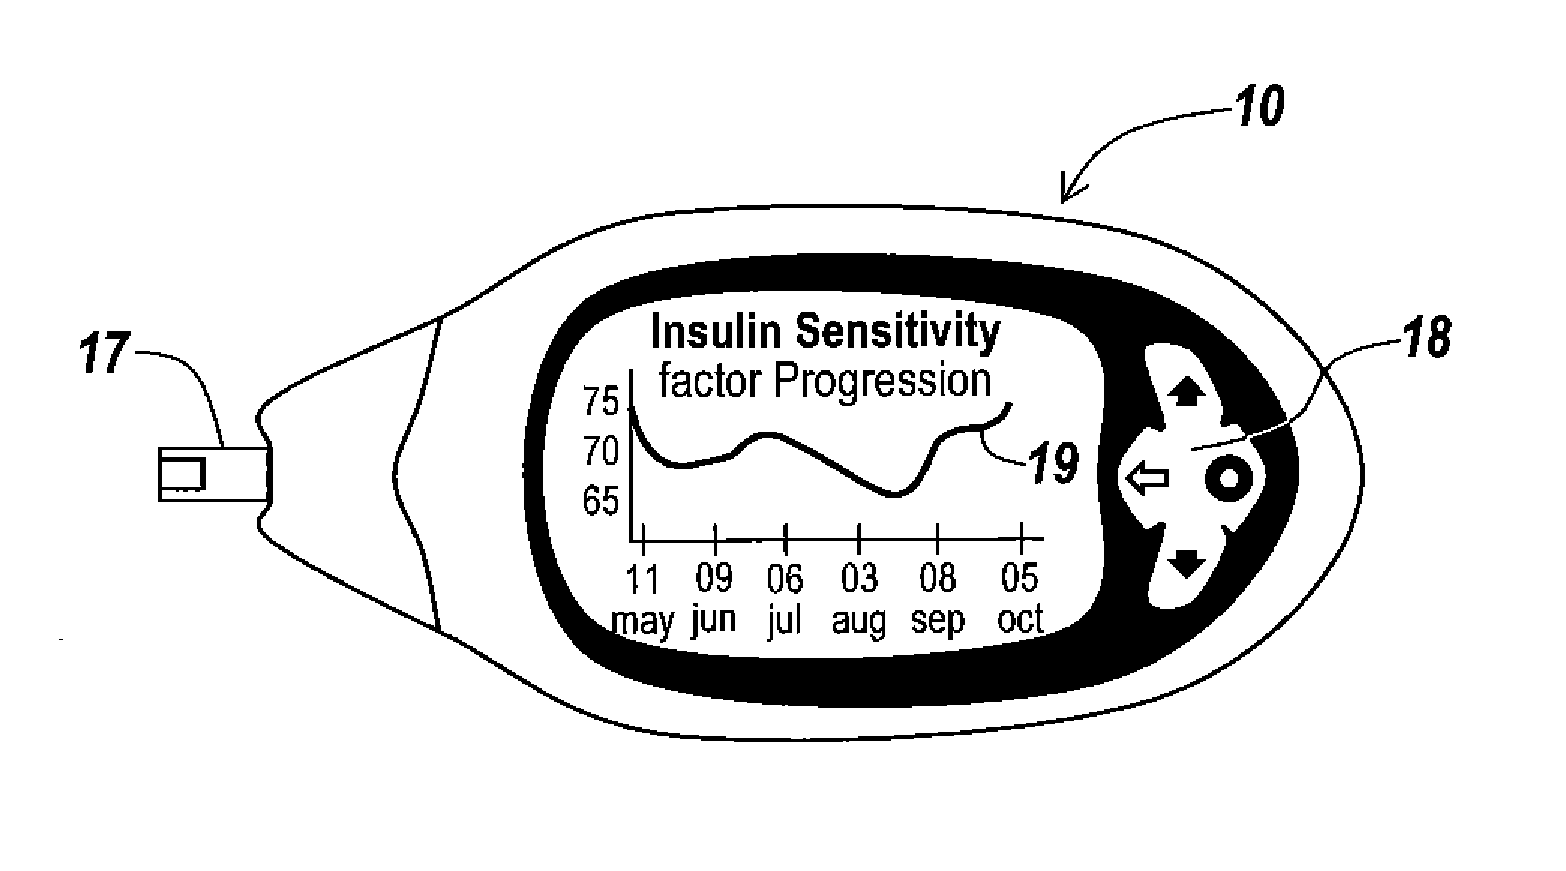 Method and Device for Utilizing Analyte Levels to Assist in the Treatment of Diabetes